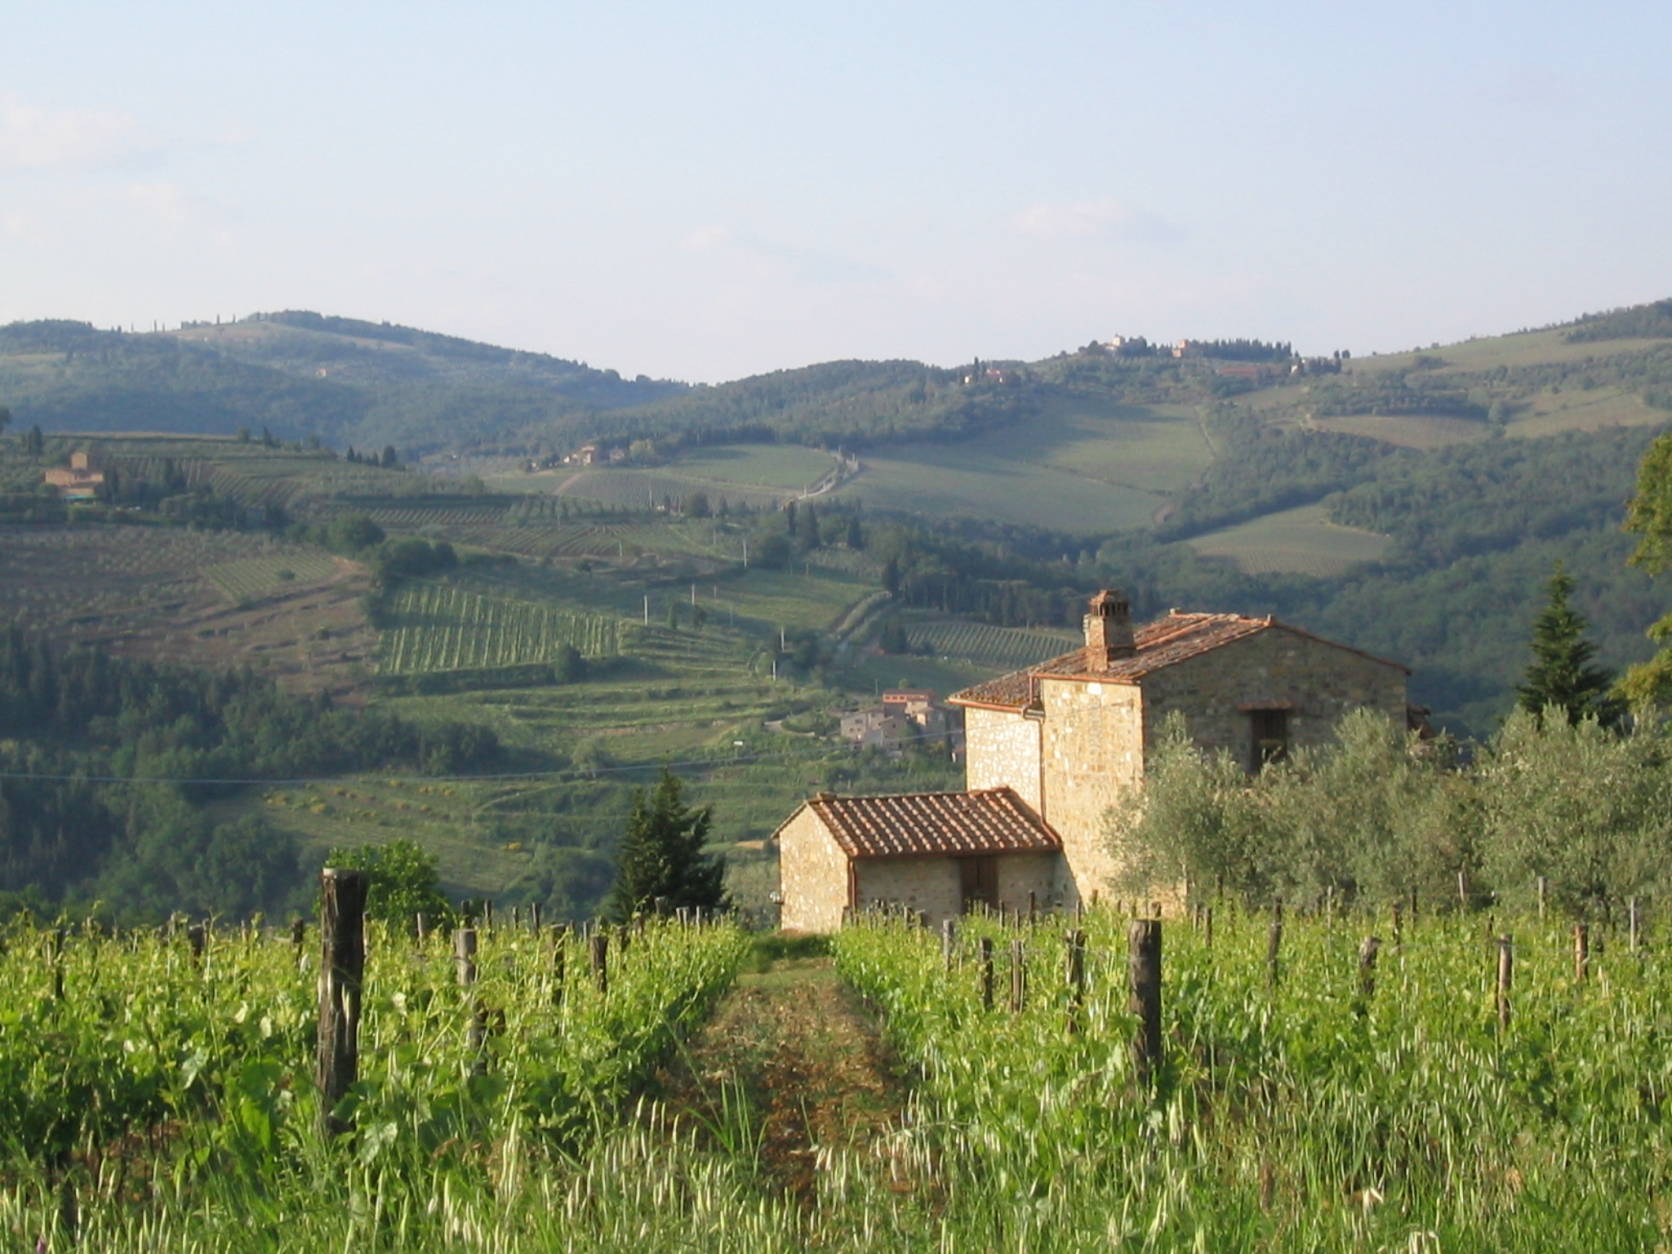 ** FILE ** The countryside in the Chianti region of Tuscany, is seen in this May 2004 photo. Imagine a world where Chianti wine is made in Scandinavia.  It could come to just that by the end of the century, experts in Italy warn, if global warming continues unchecked. (AP Photo/Gretchen Heefner)